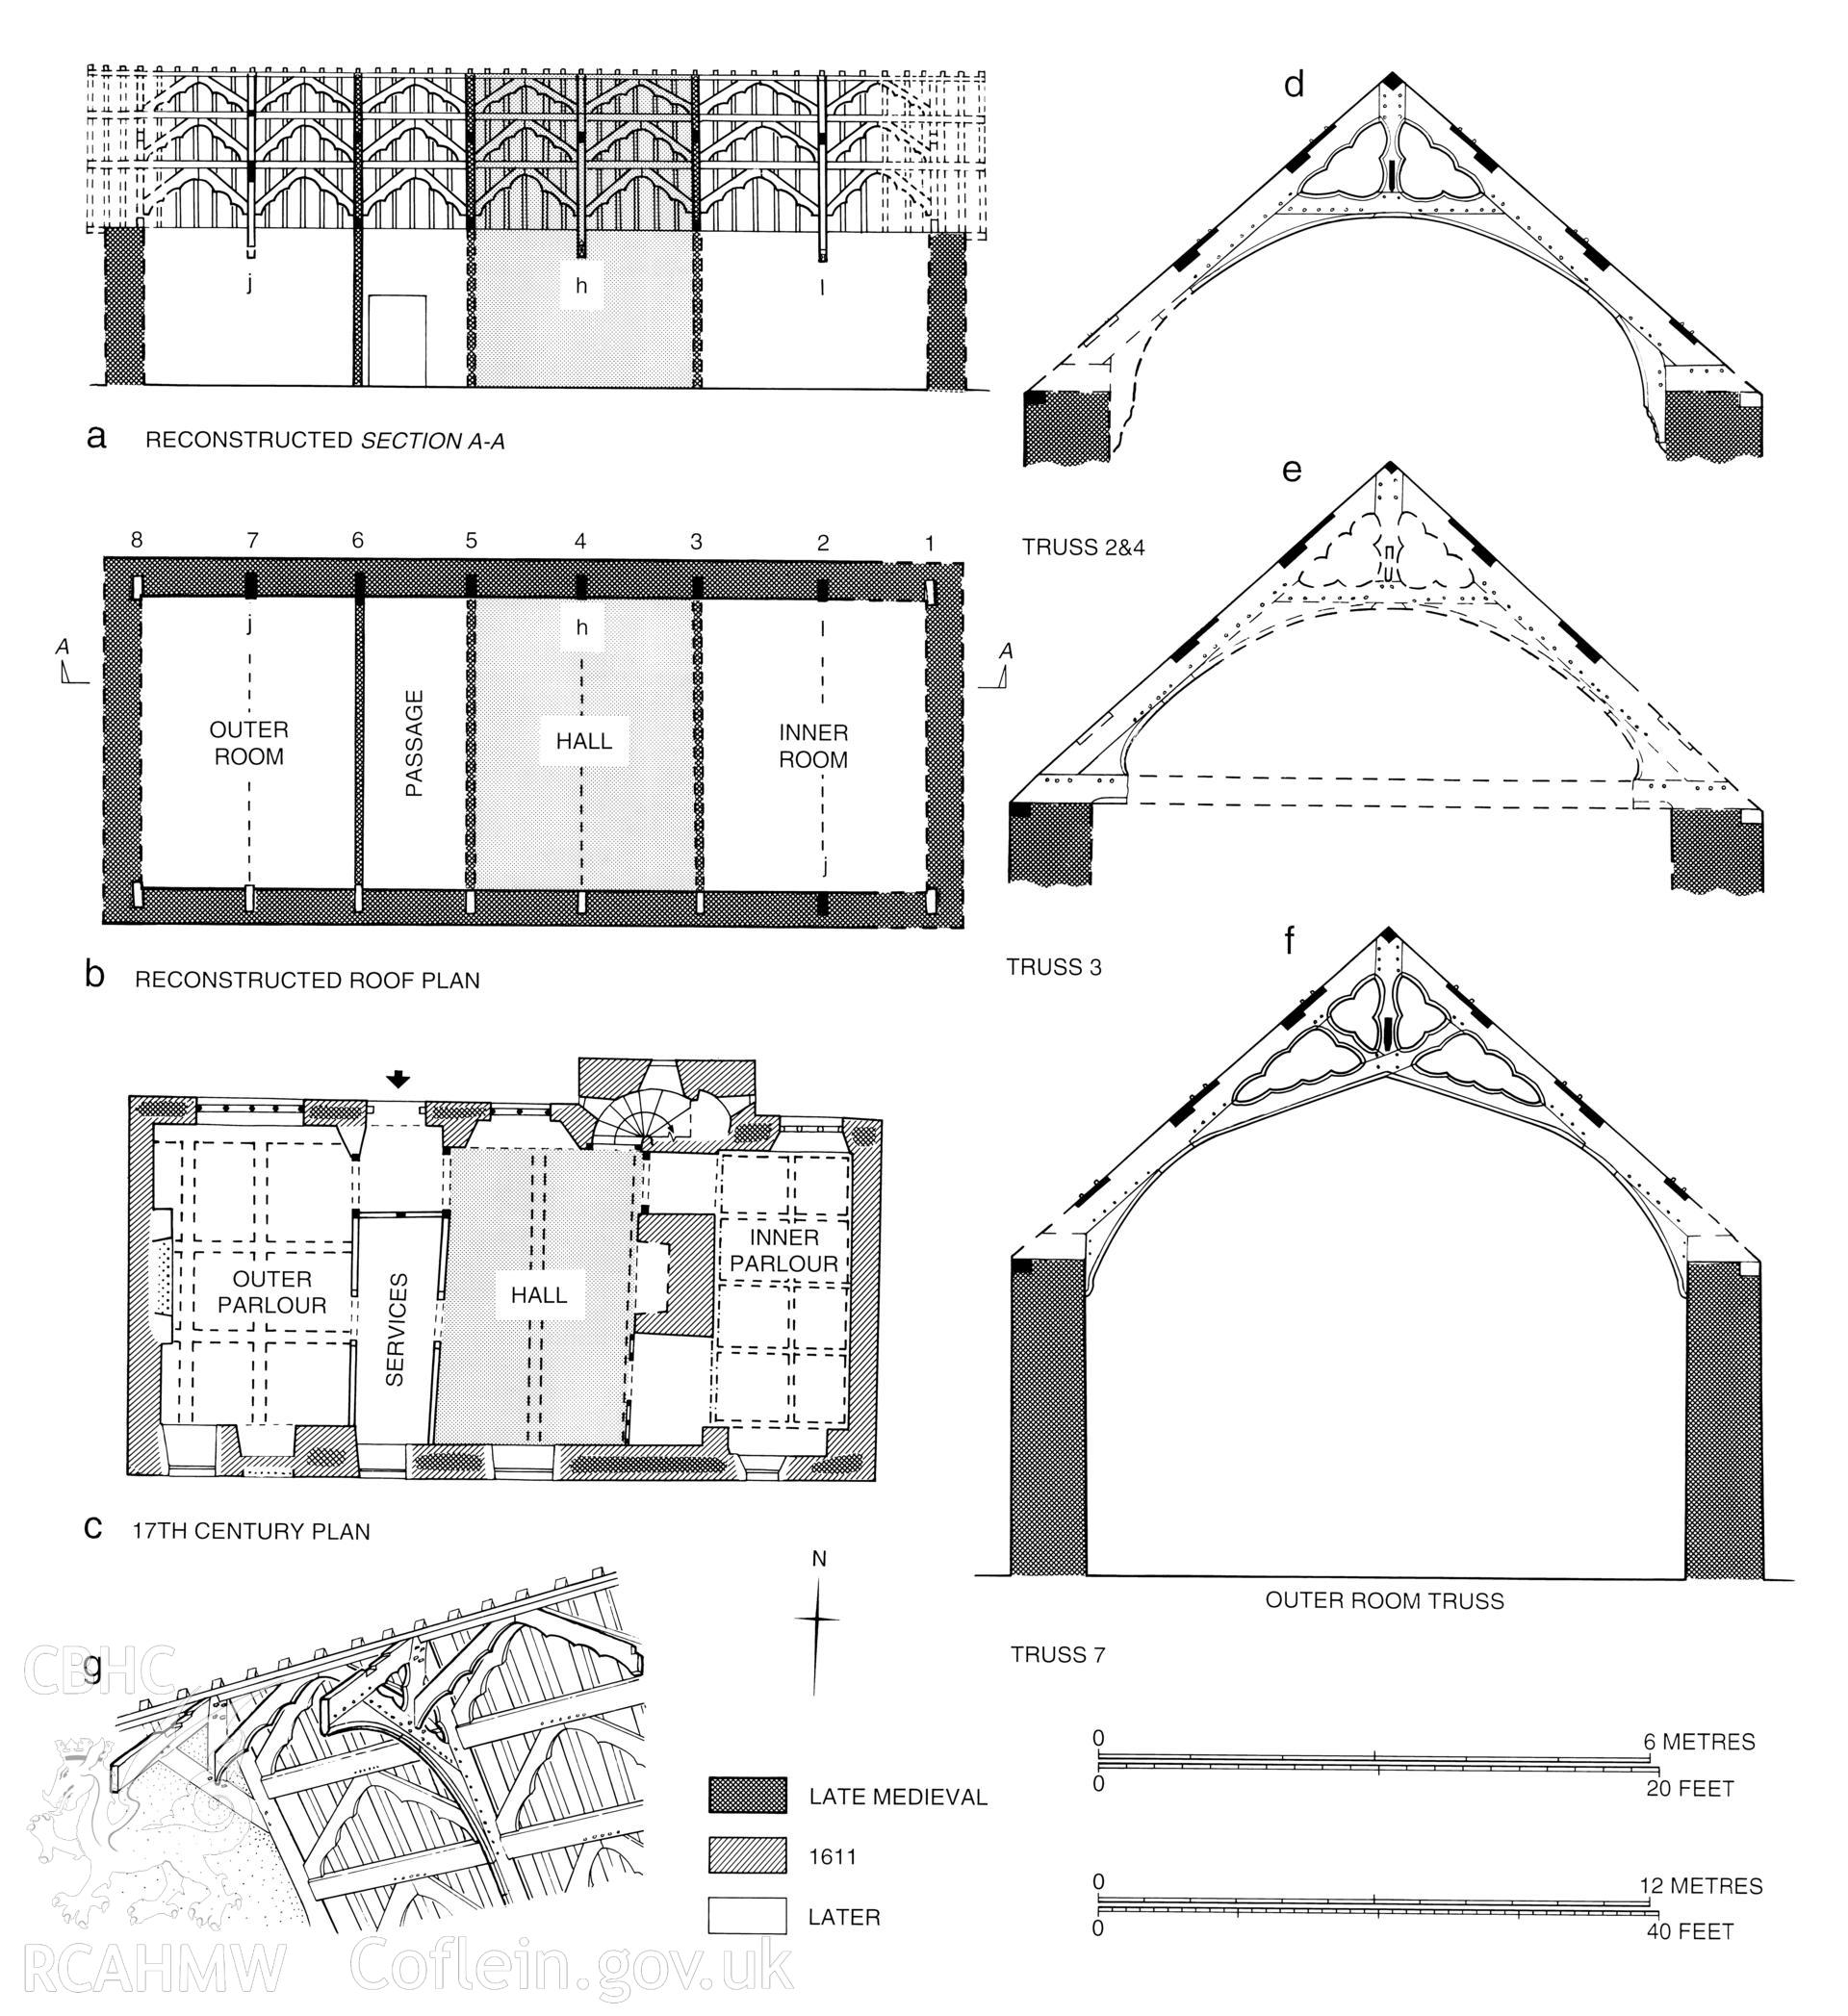 Old Vicarage, Glasbury; measured drawings comprising reconstructed section, plans, drawings of  roof trusses, as published in the RCAHMW volume, Houses and History in the Marches of Wales. Radnorshire 1400-1800,  page 81, figure 80.